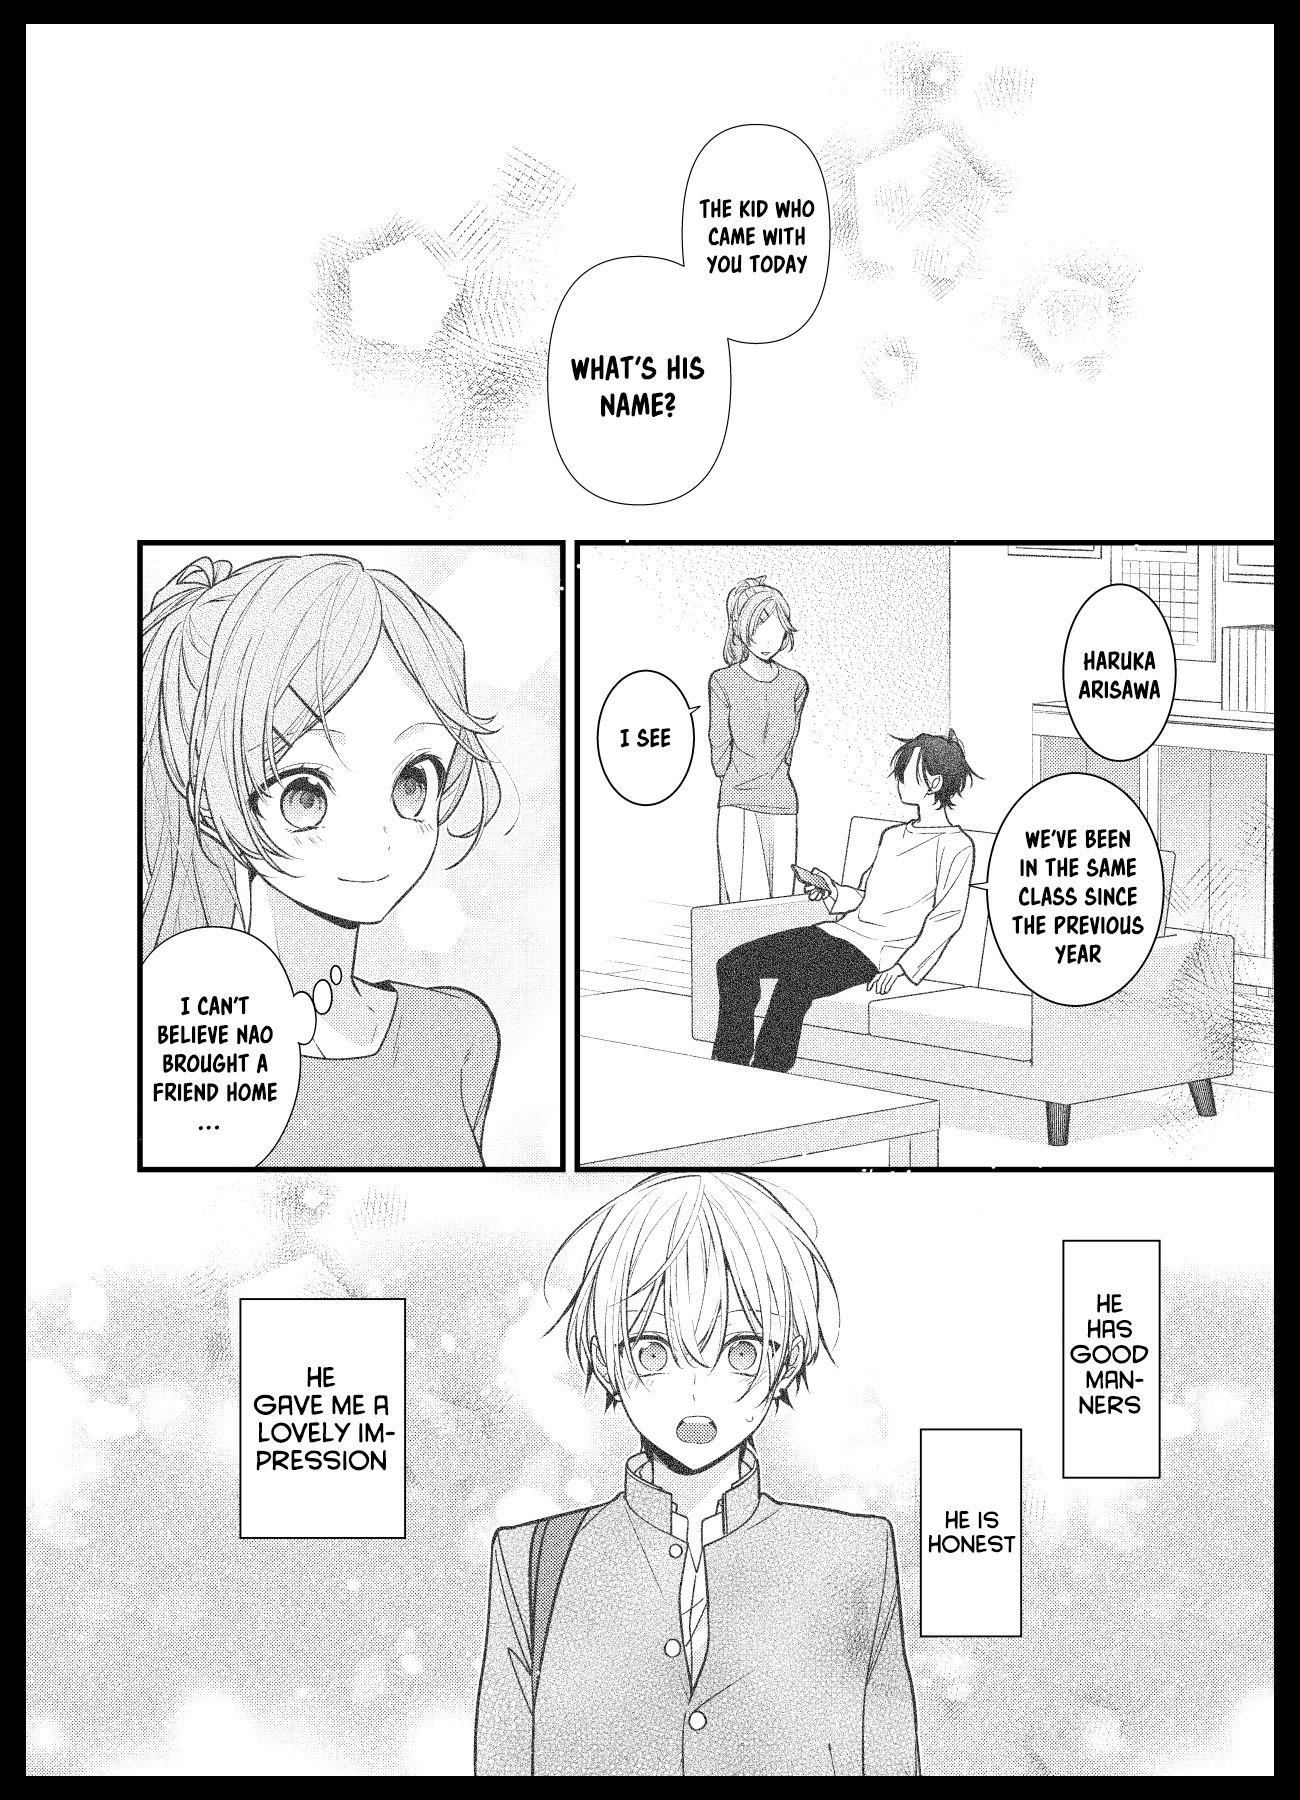 The Story Of A Guy Who Fell In Love With His Friend's Sister - Page 2